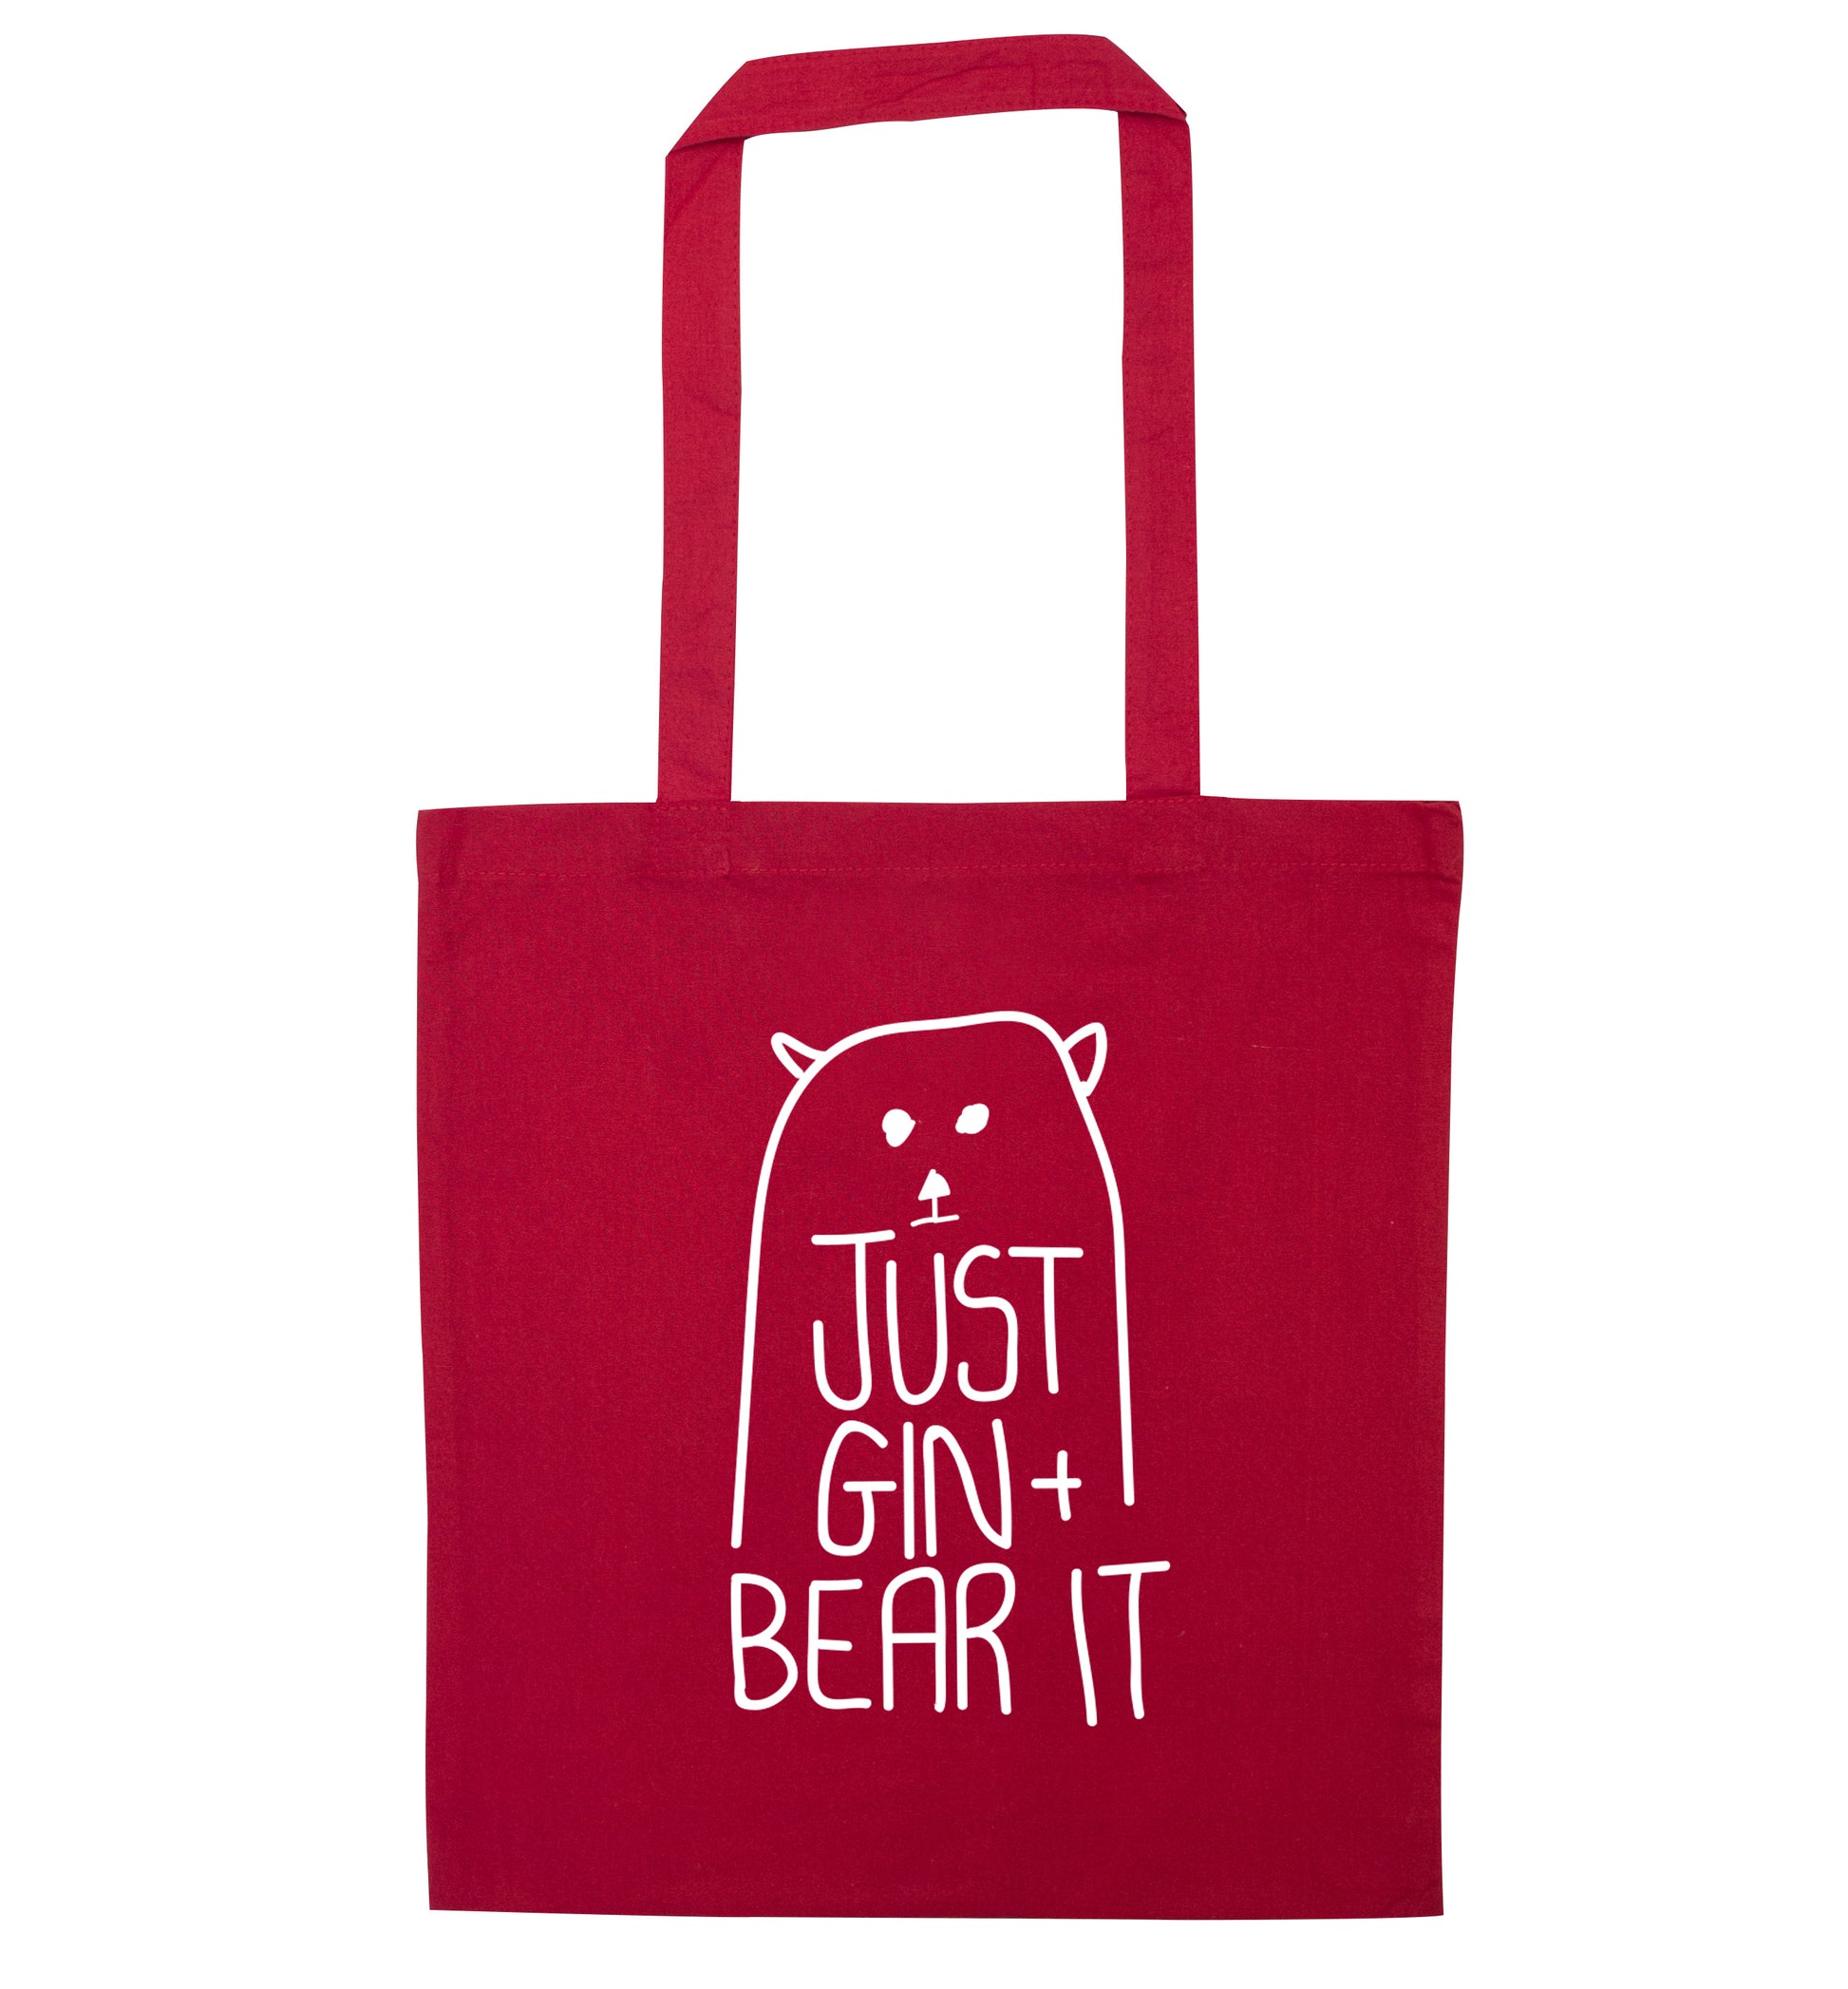 Just gin and bear it red tote bag